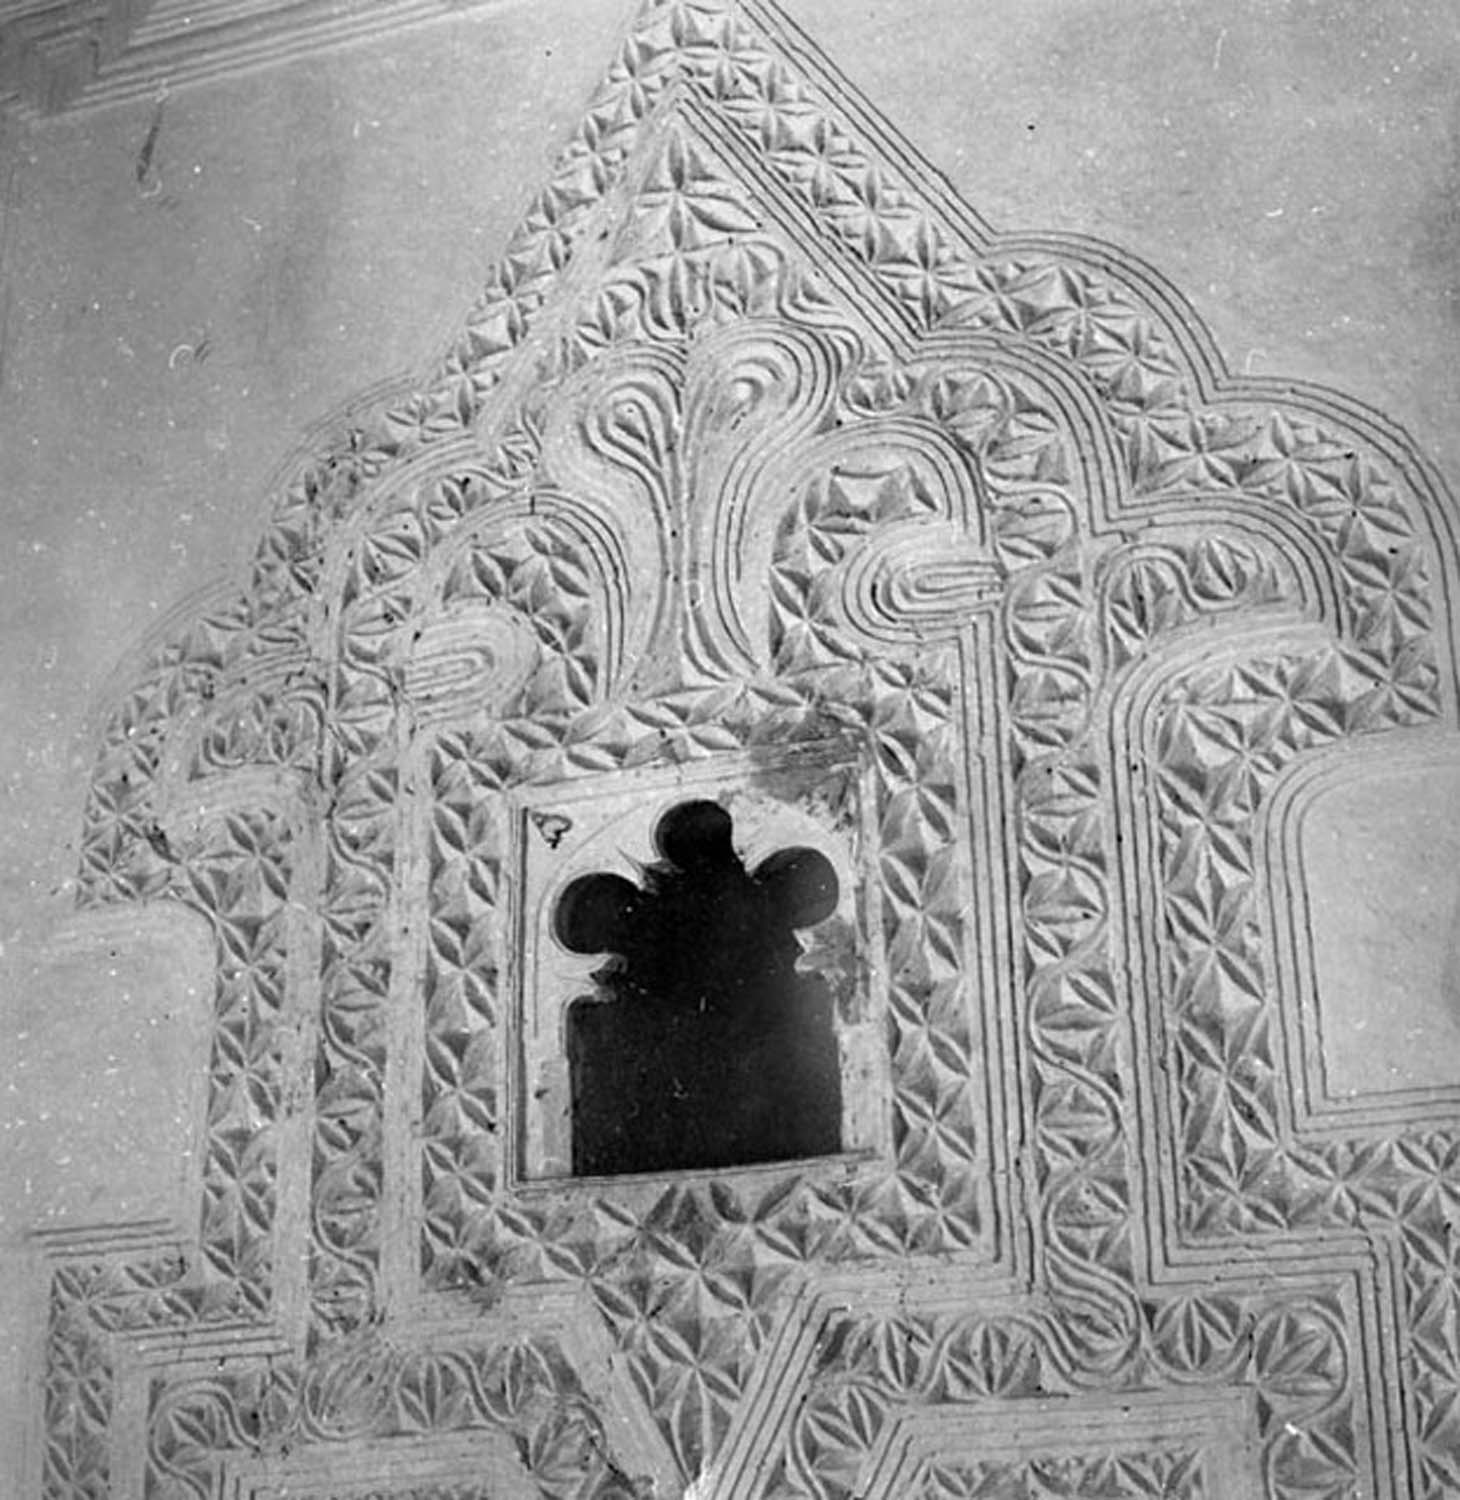 Detail view of kipiya (decorative plasterwork) dado around wall niche at one end of the outer room